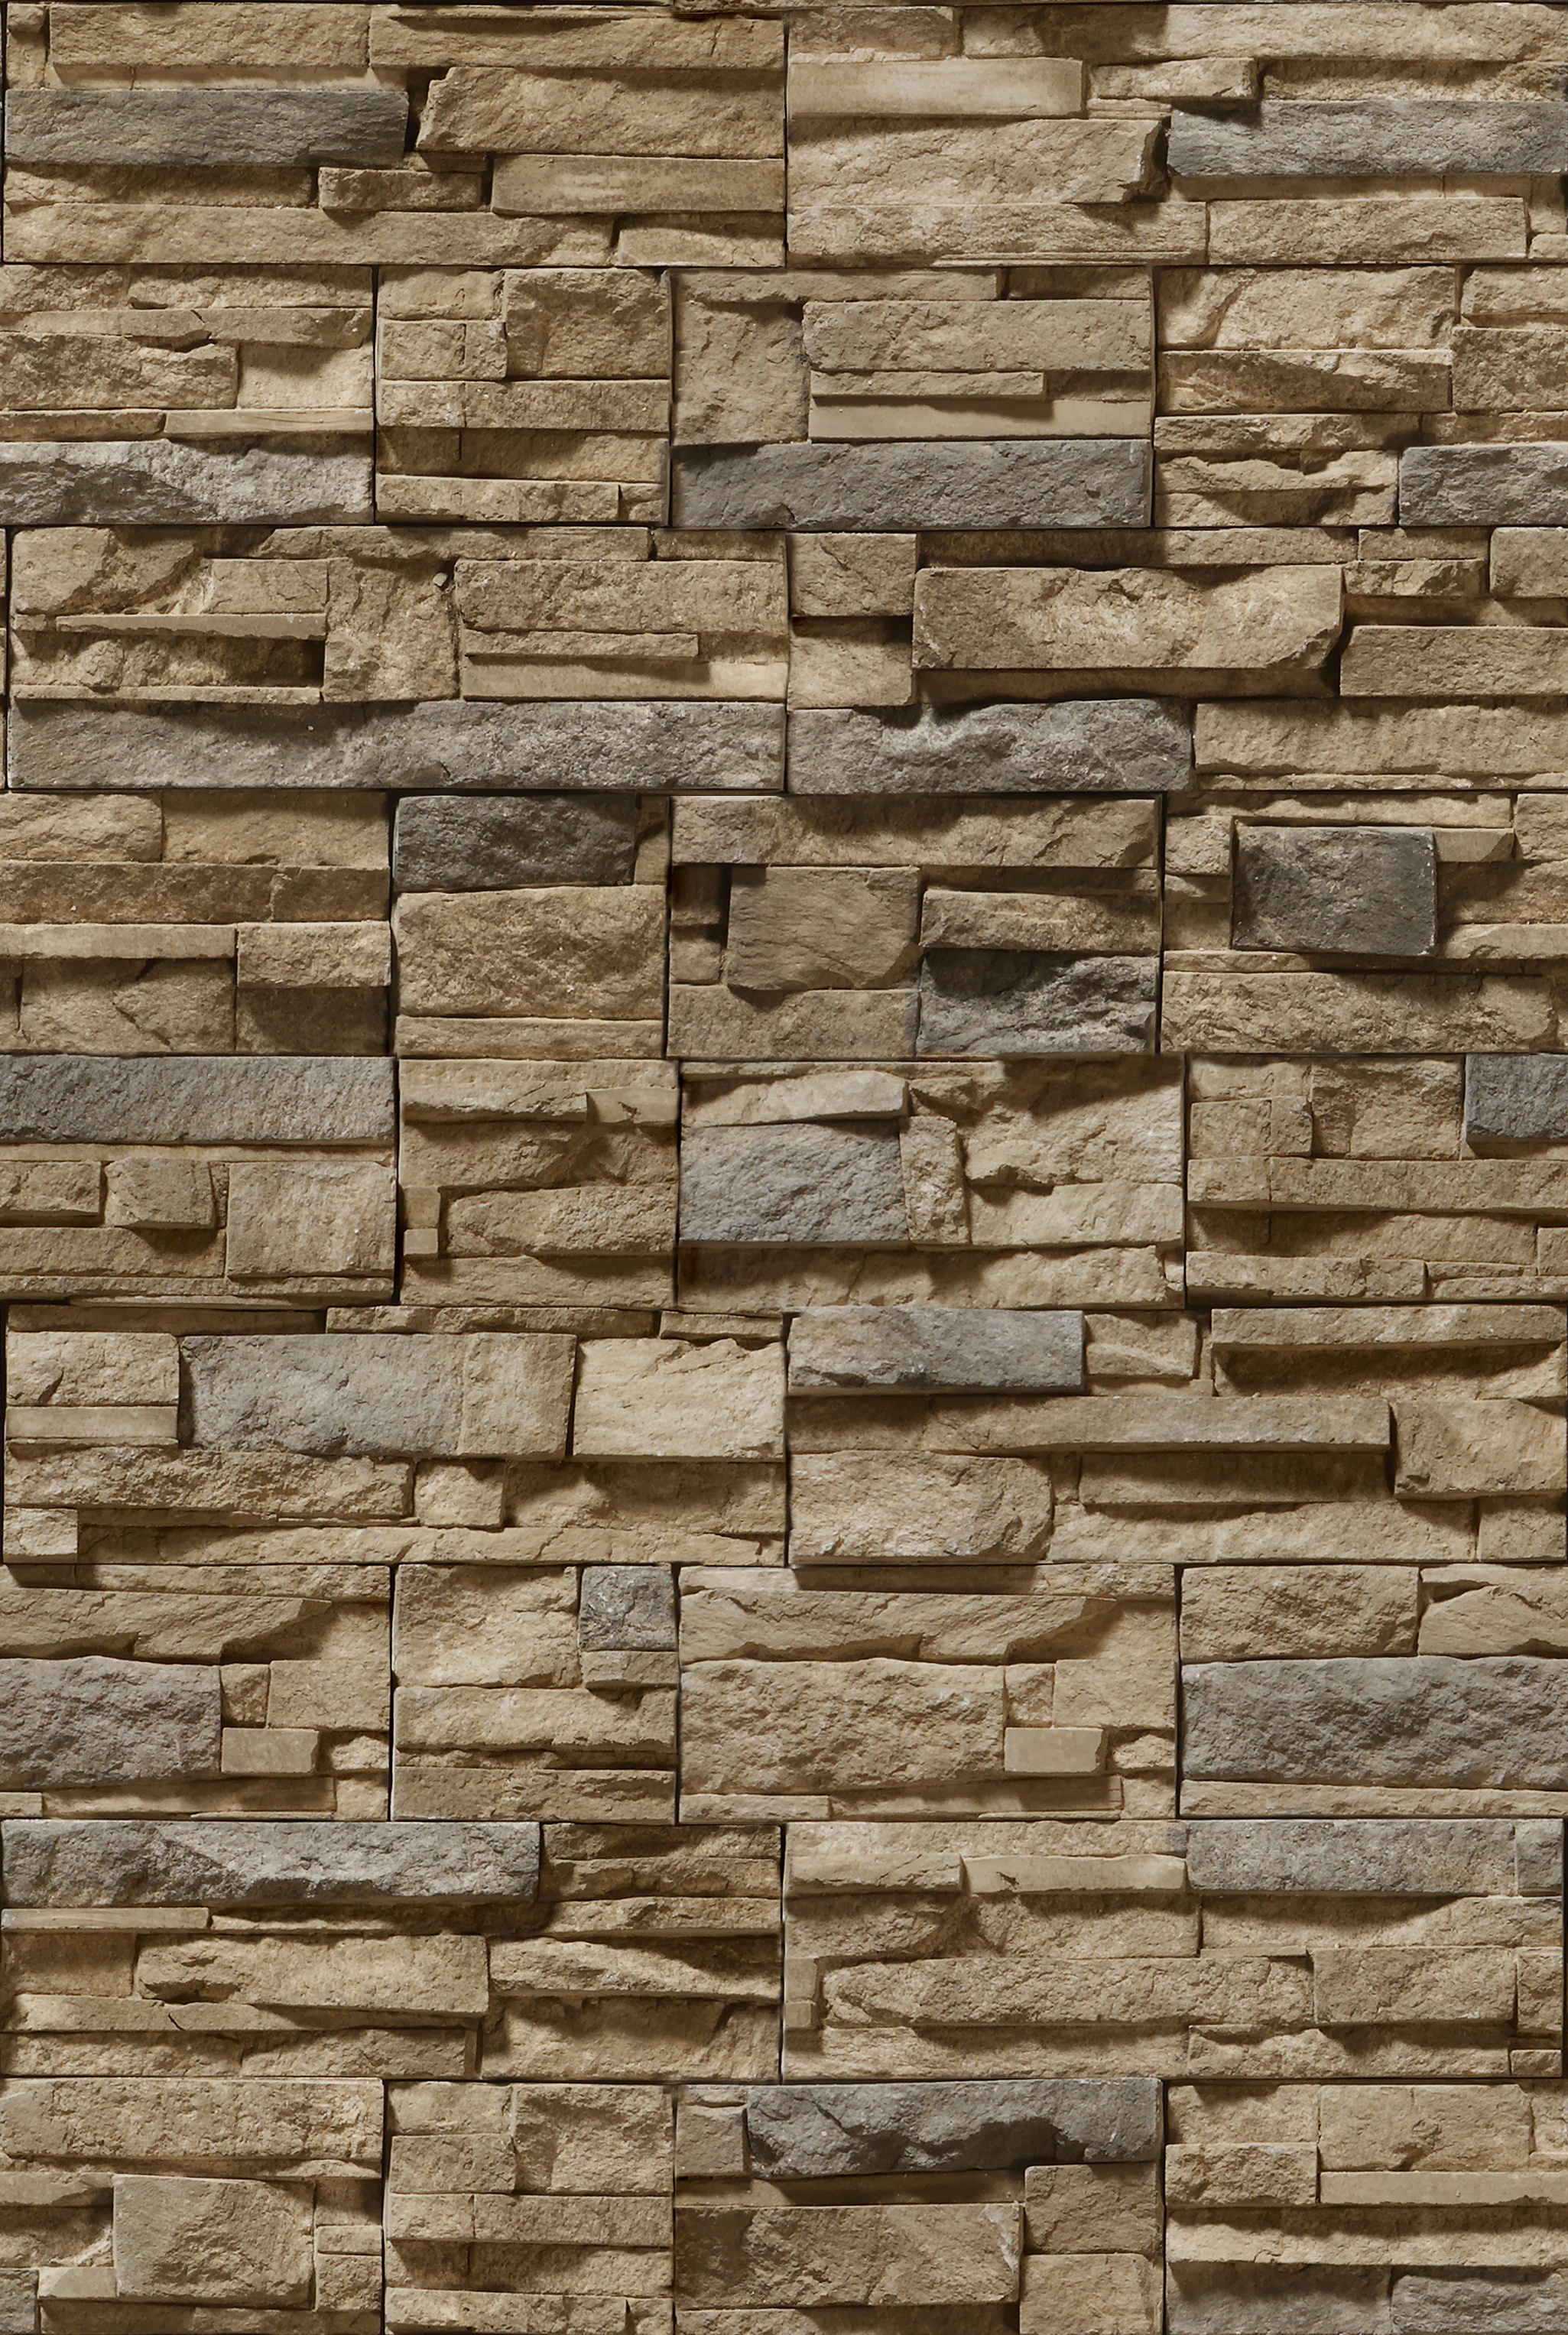  stone, wall, texture stone, stone wall, download background, stone background